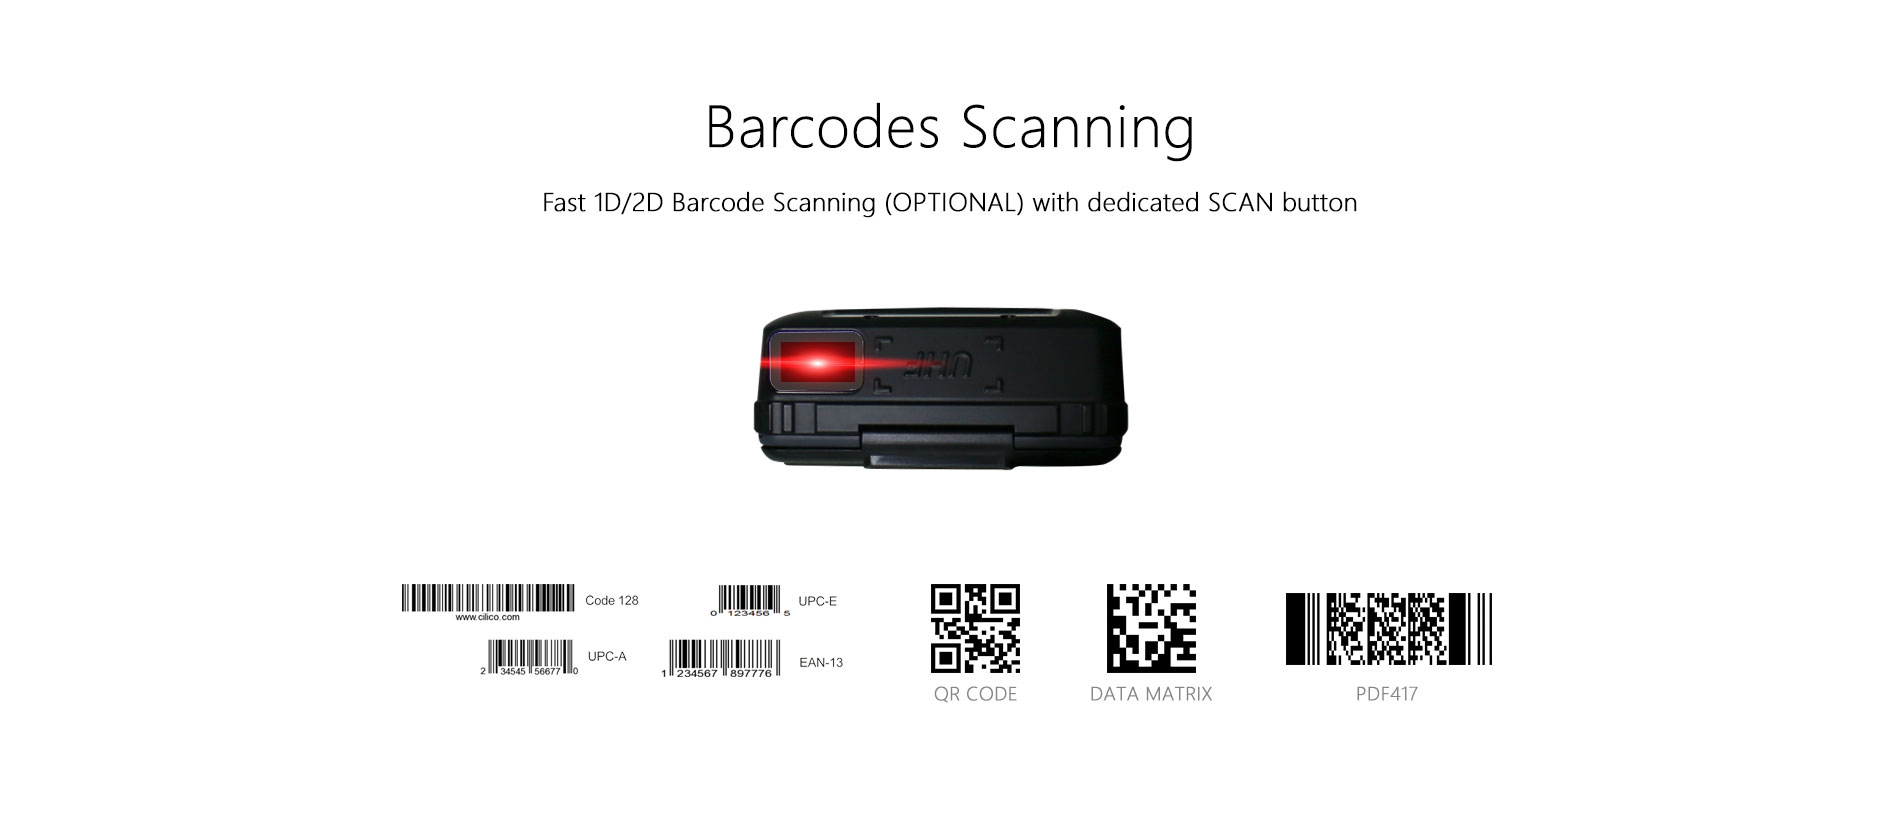 Barcode scanner smart device with printer